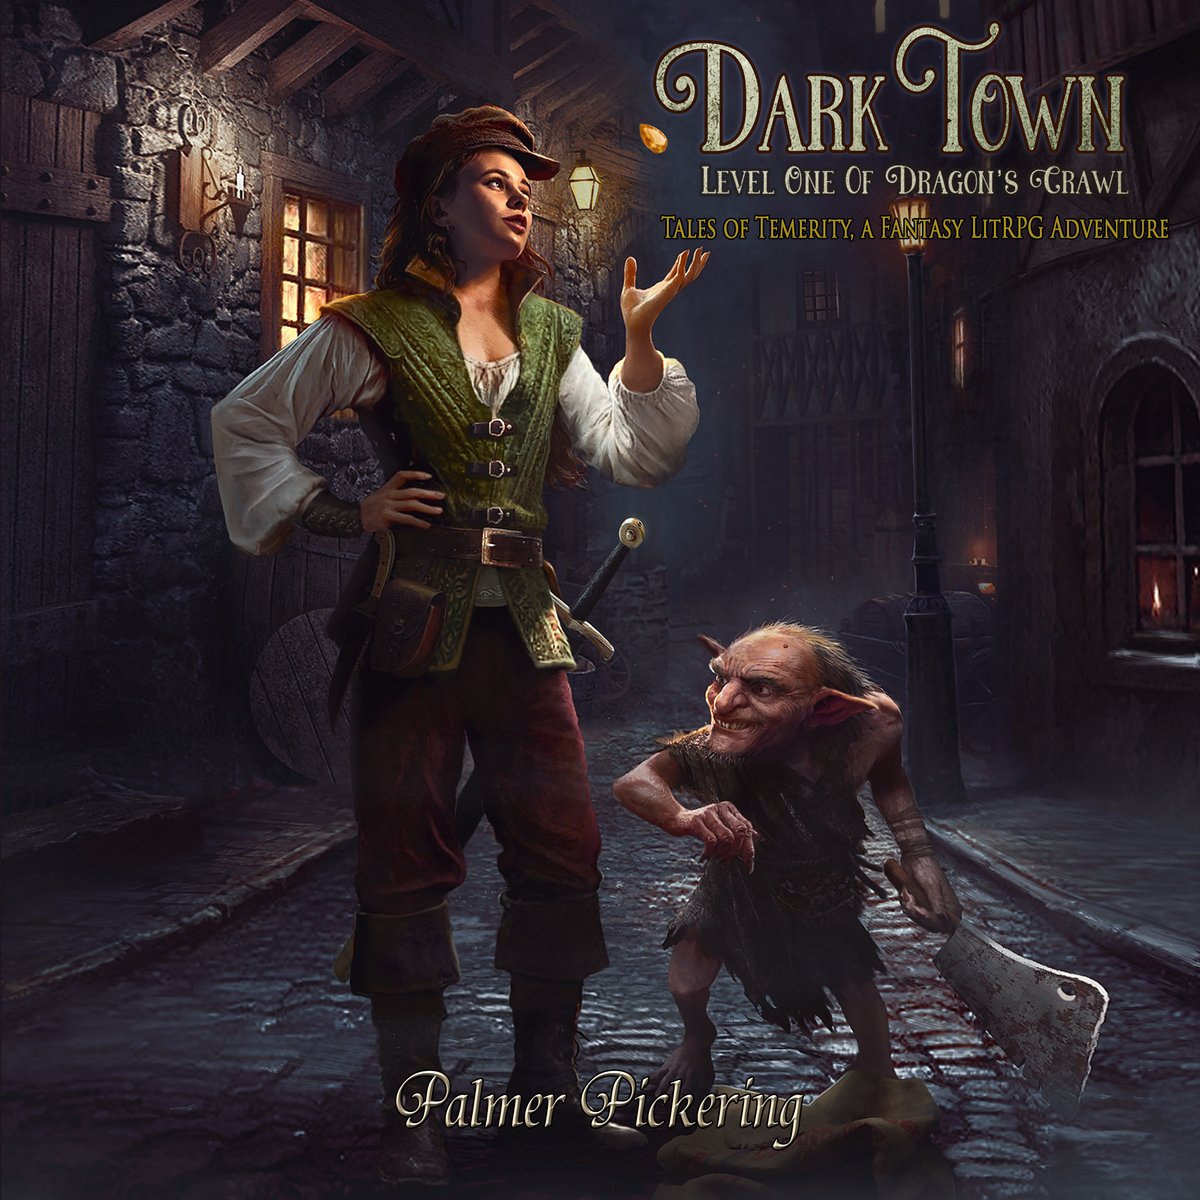 Dark Town is out now on Amazon and Kindle (Unlimited). Universal link below. On Audible soon. Paperbacks  available everywhere. A fun and sometimes dark LitRPG with no stats and all the adventure. Part cozy, part bloody, all fun. 

mybook.to/DarkTown